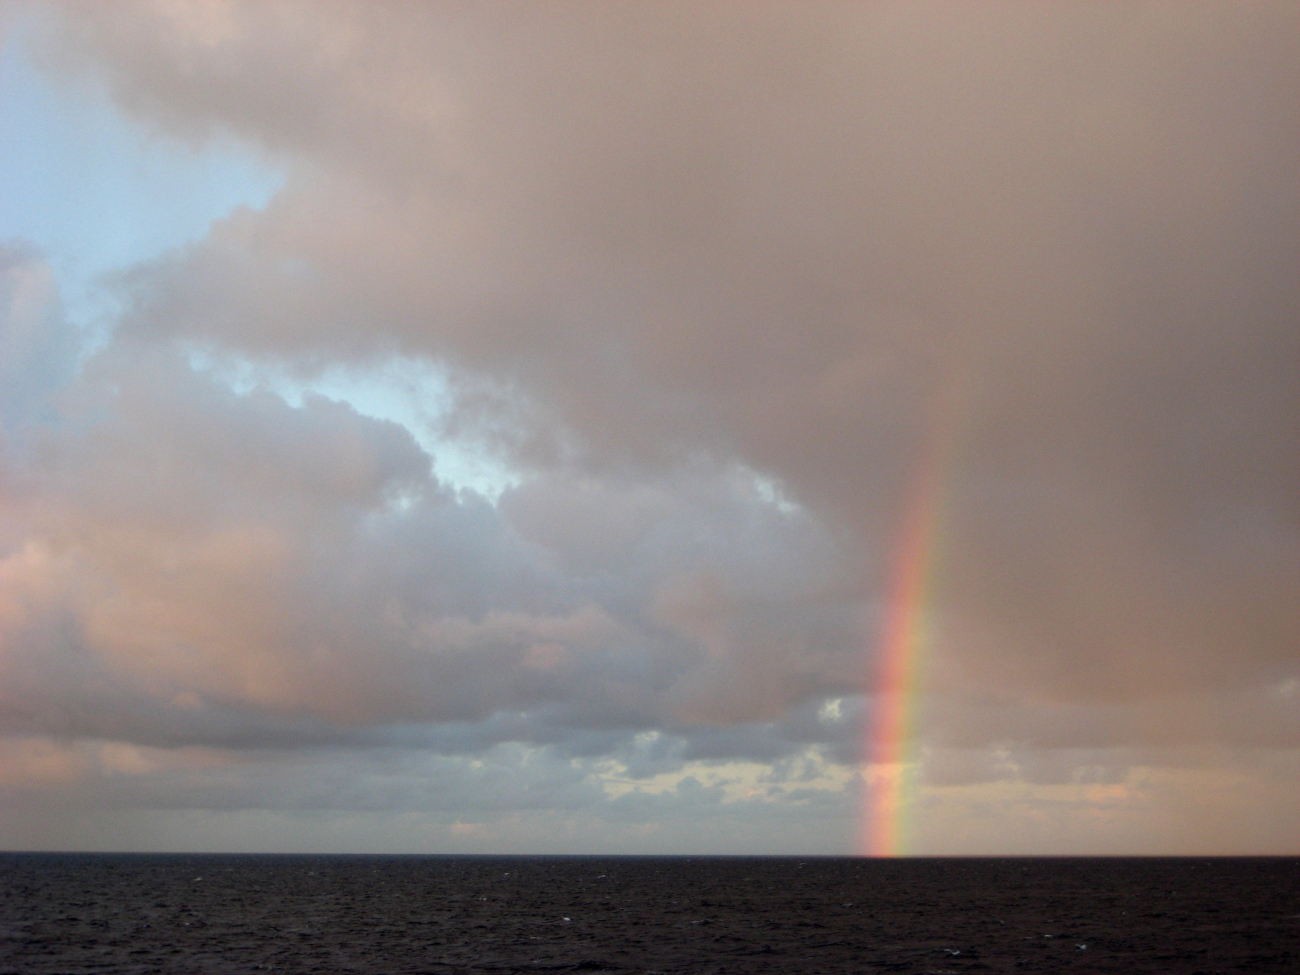 A partial rainbow over the tropical Pacific Ocean